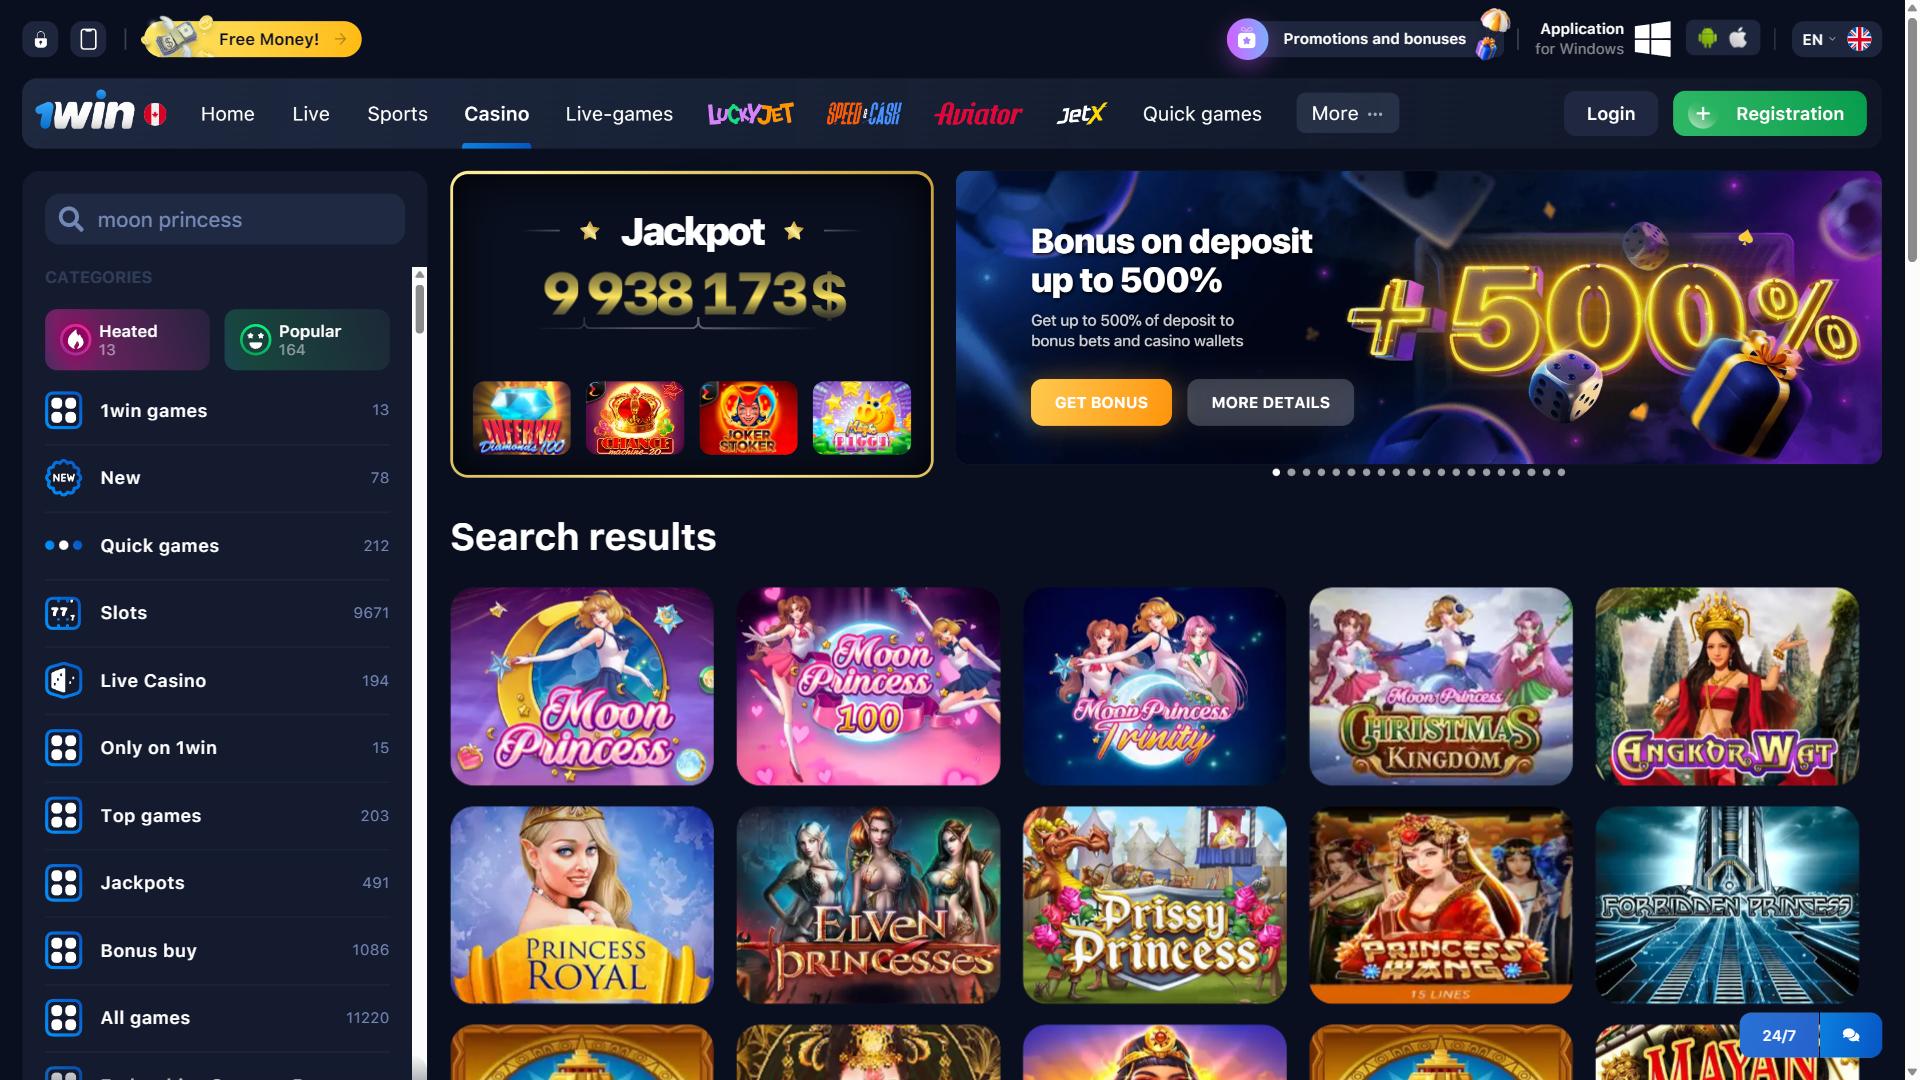 Advantages of 1win Casino for Moon Princess Players